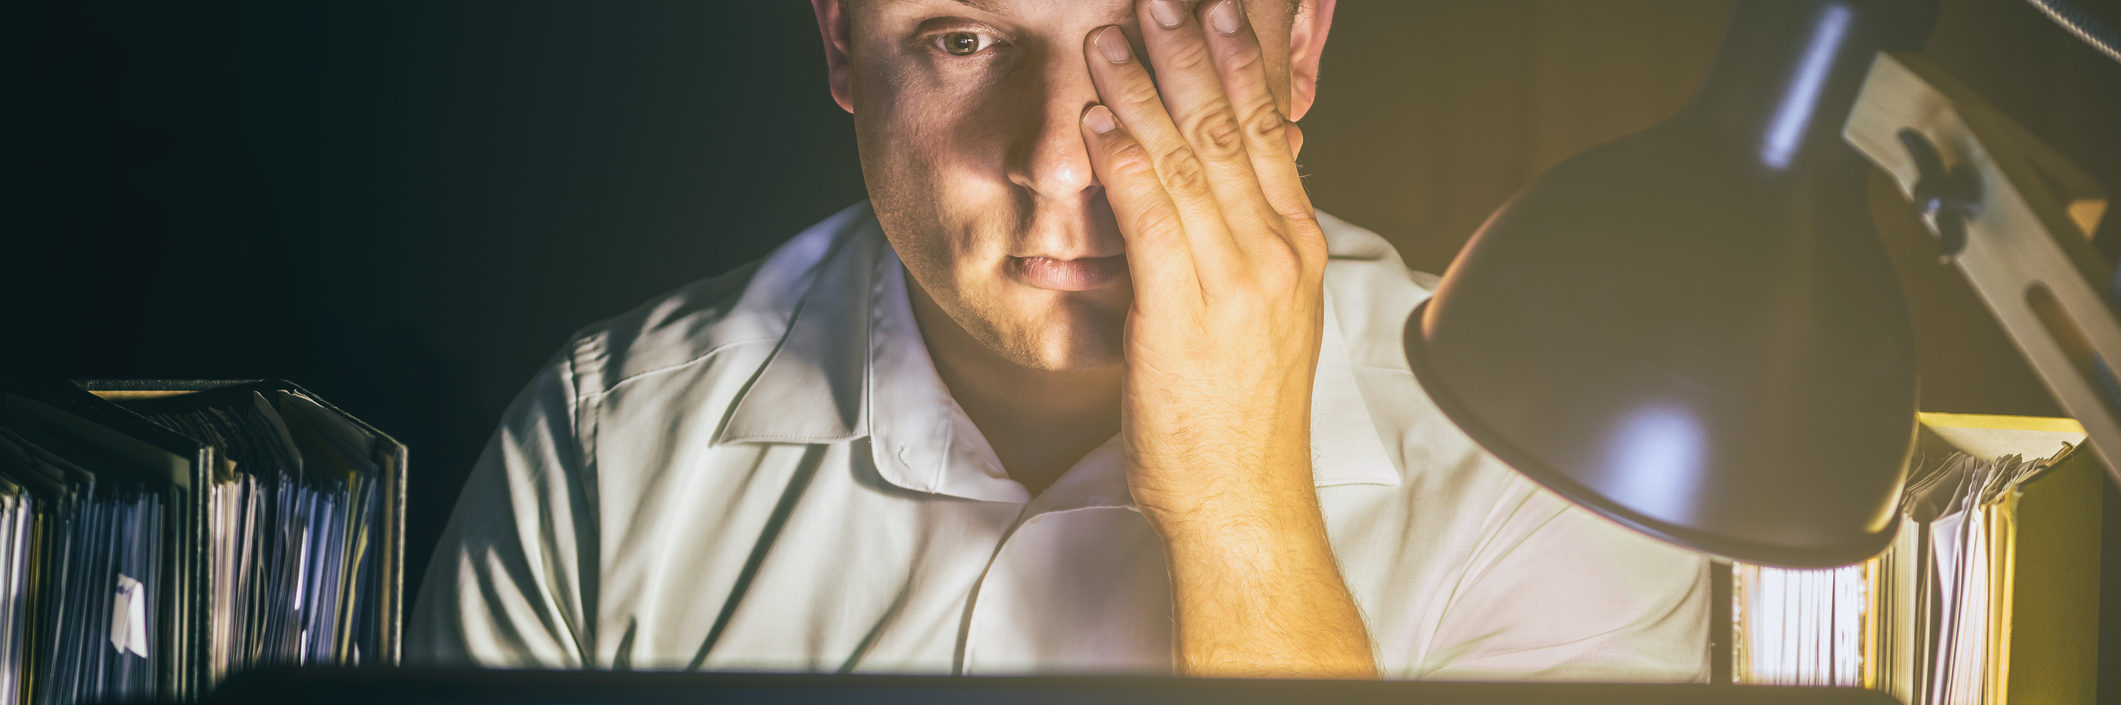 main image - Man with tired eyes due to too much work on the computer screen